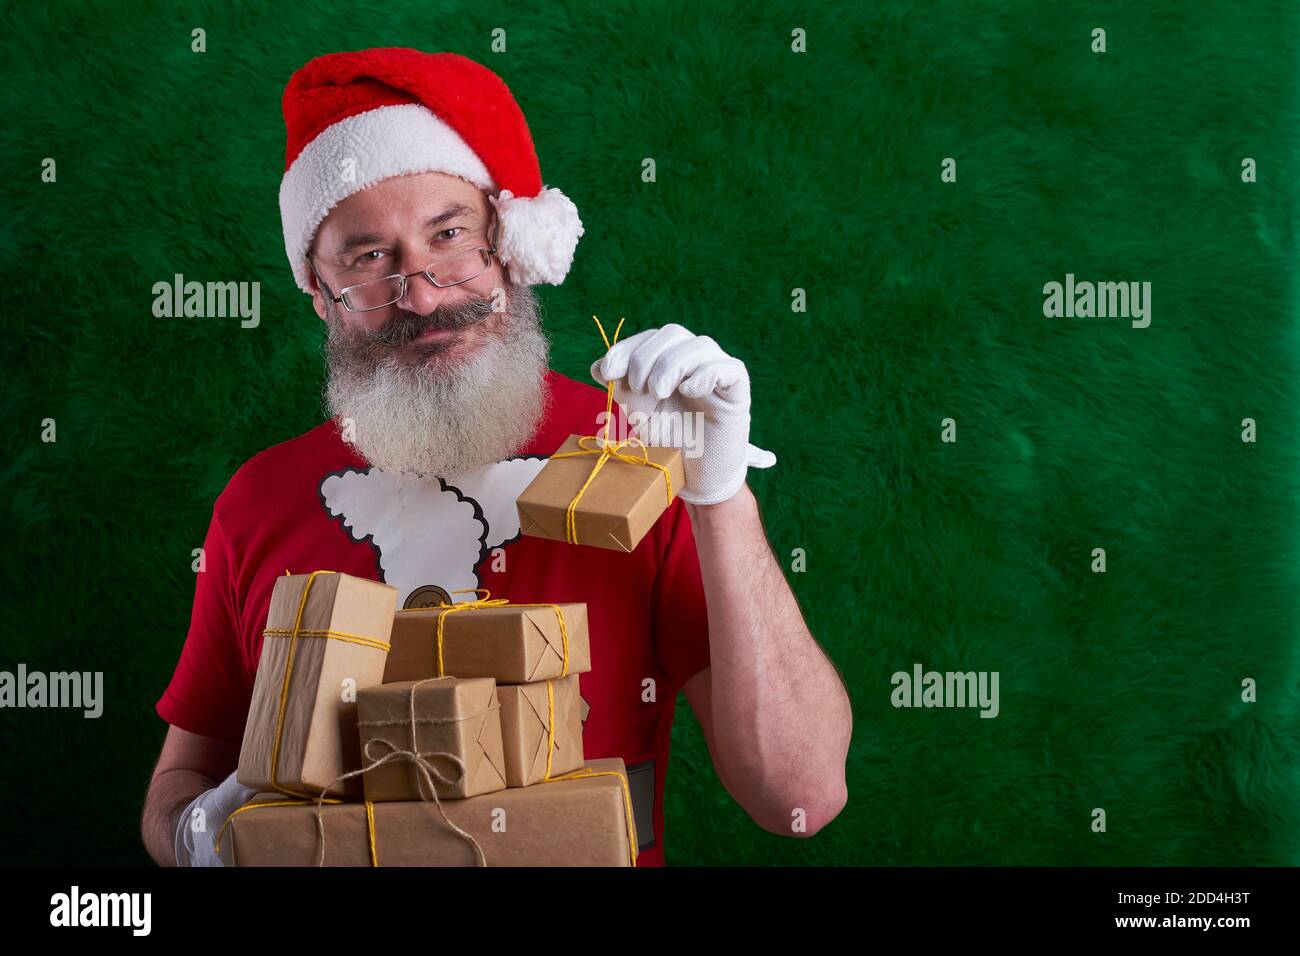 Mature bearded man wearing Santa hat with many gifts in hand, Santa smiling and looking at camera, copy space Stock Photo